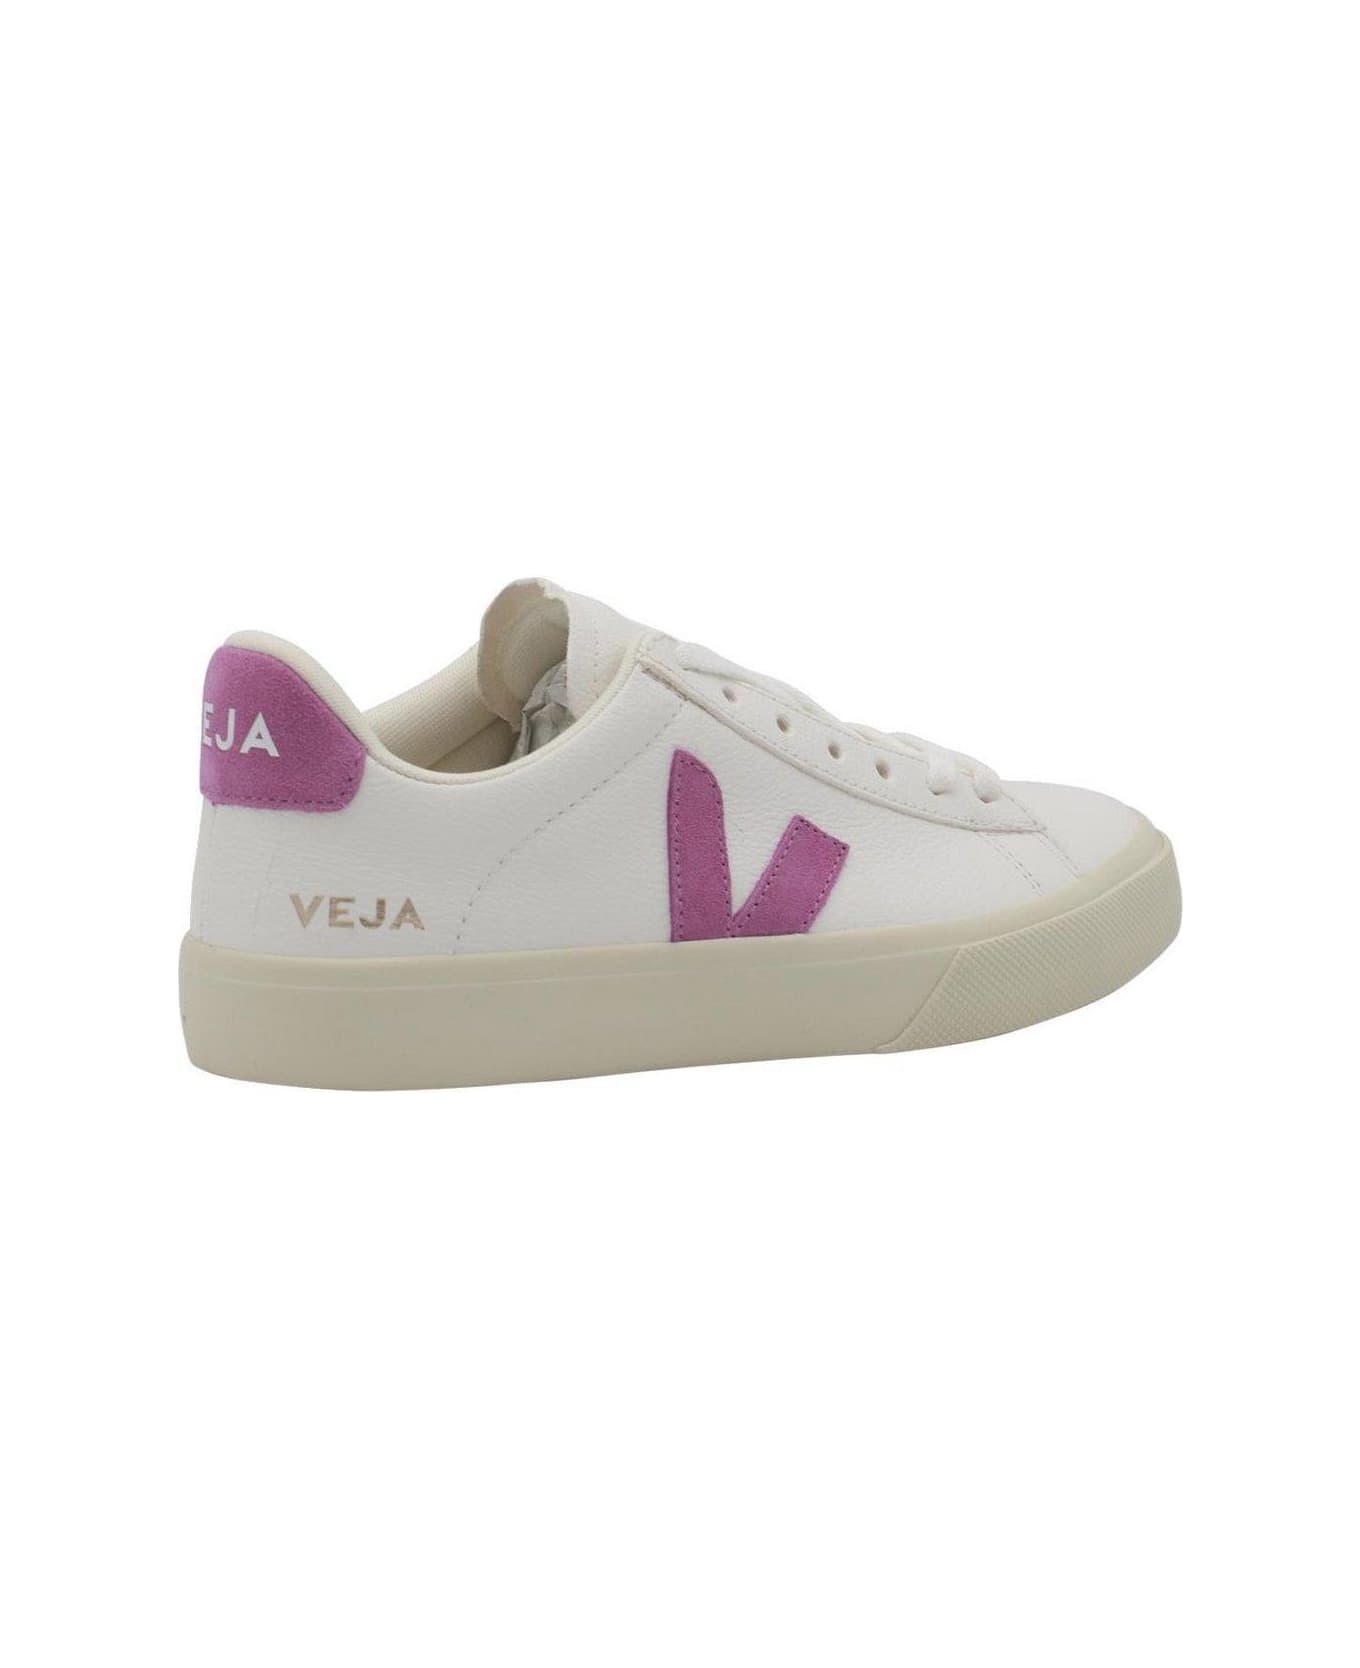 Veja Campo Logo Patch Sneakers - White/Mulberry